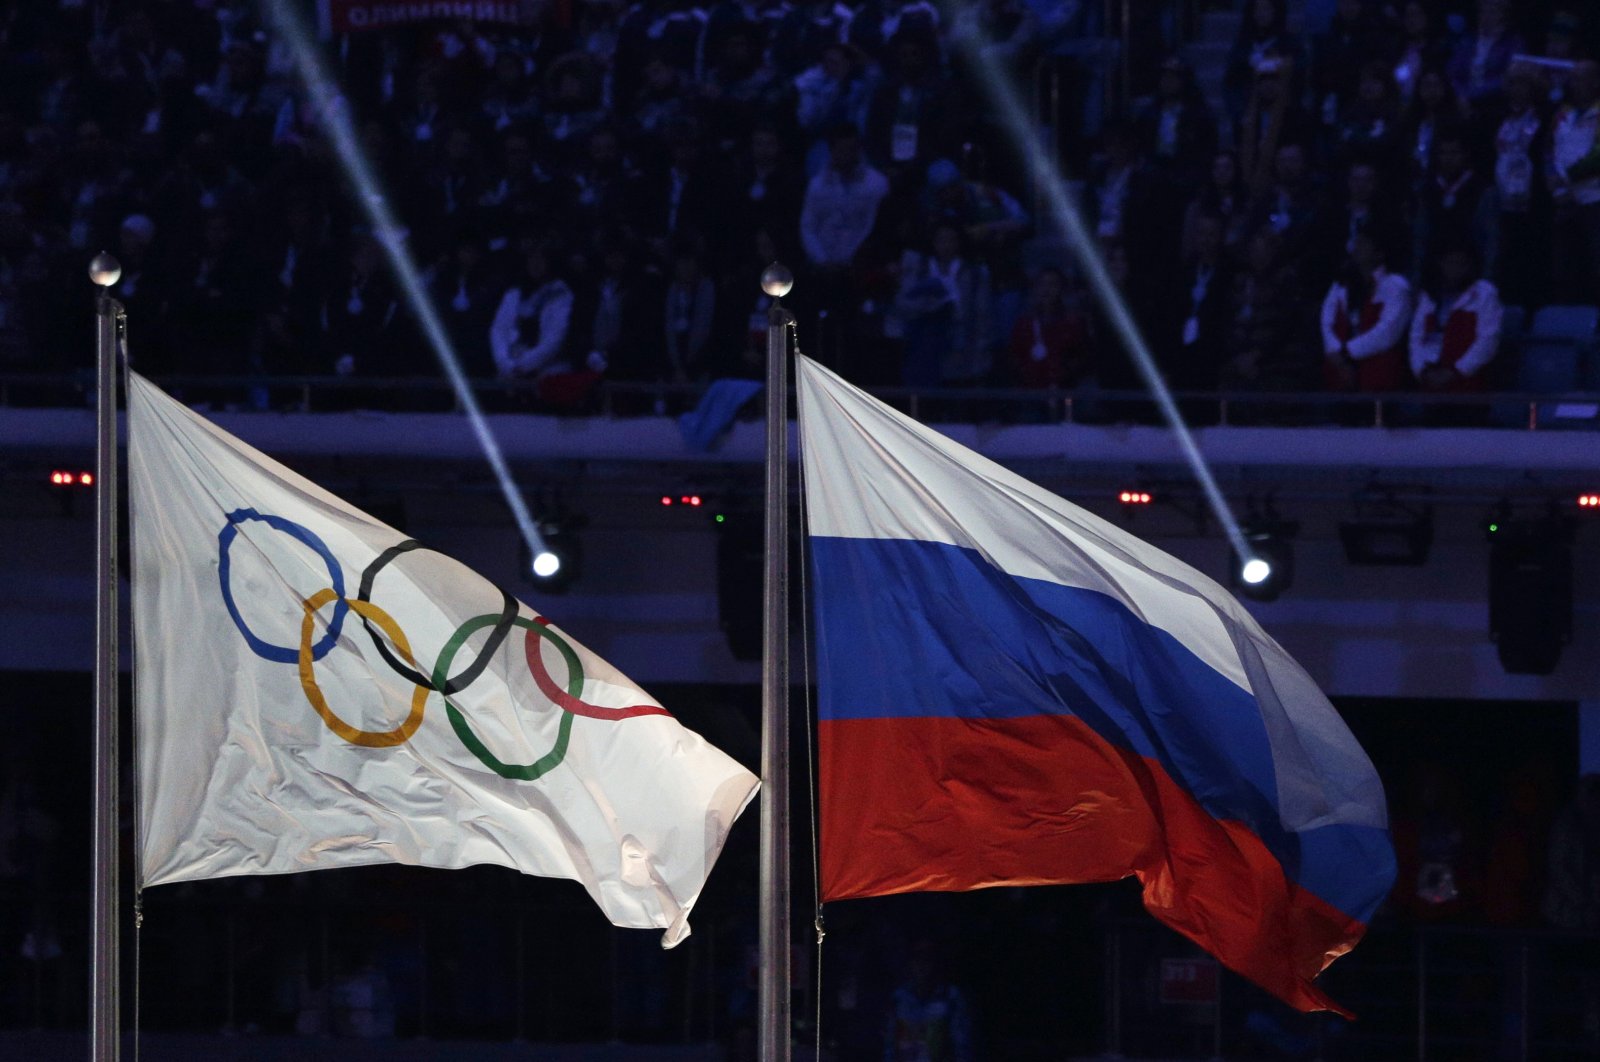 The Russian national flag (R) flies after it is hoisted next to the Olympic flag during the closing ceremony of the 2014 Winter Olympics, Sochi, Russia, Feb. 23, 2014. (AP Photo)